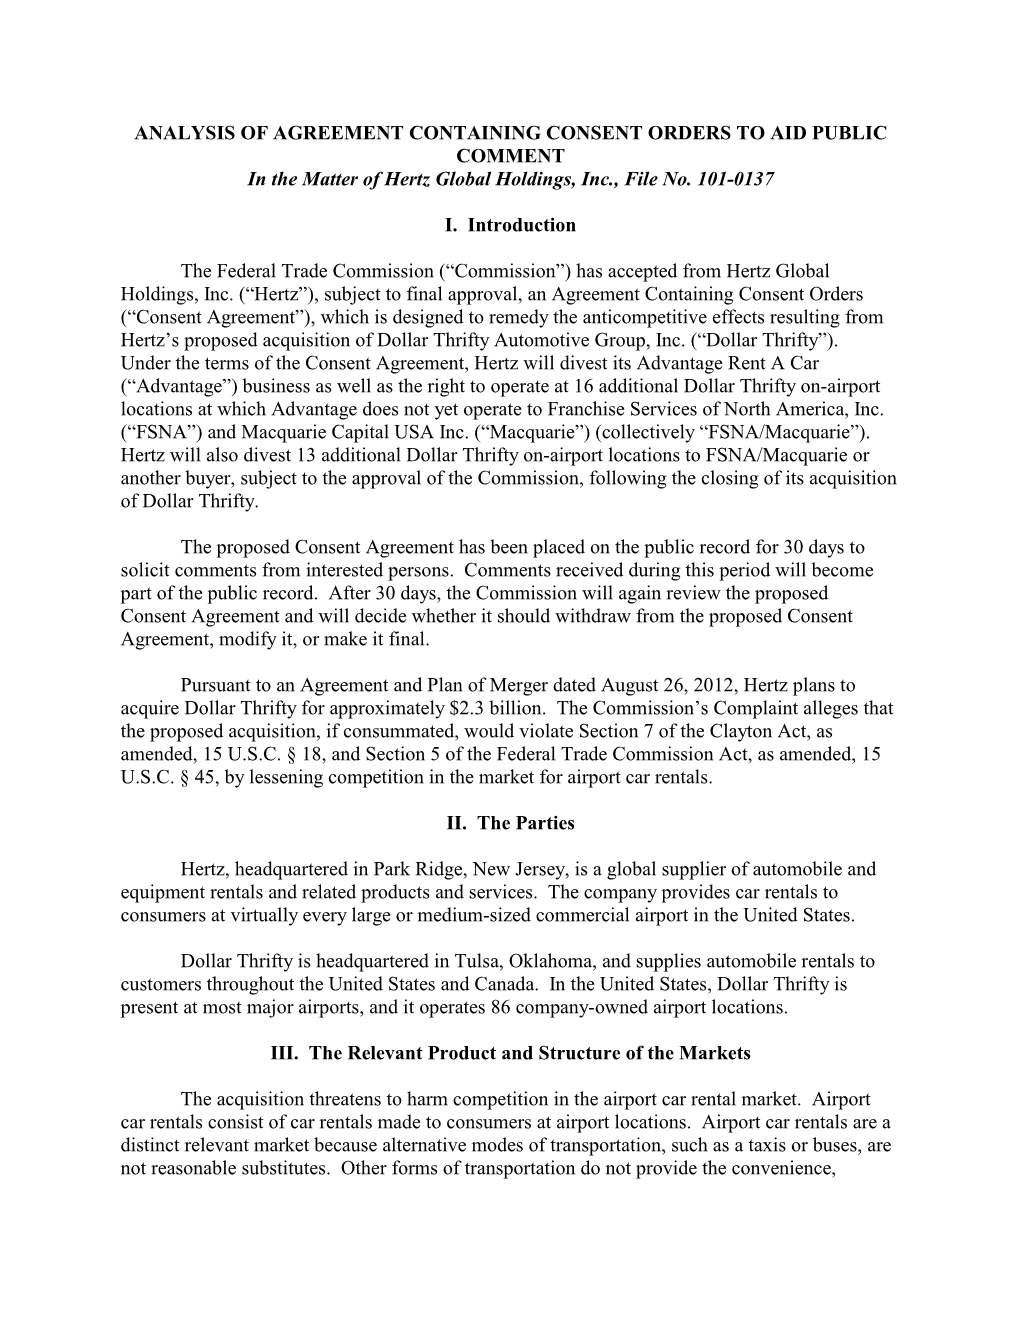 ANALYSIS of AGREEMENT CONTAINING CONSENT ORDERS to AID PUBLIC COMMENT in the Matter of Hertz Global Holdings, Inc., File No